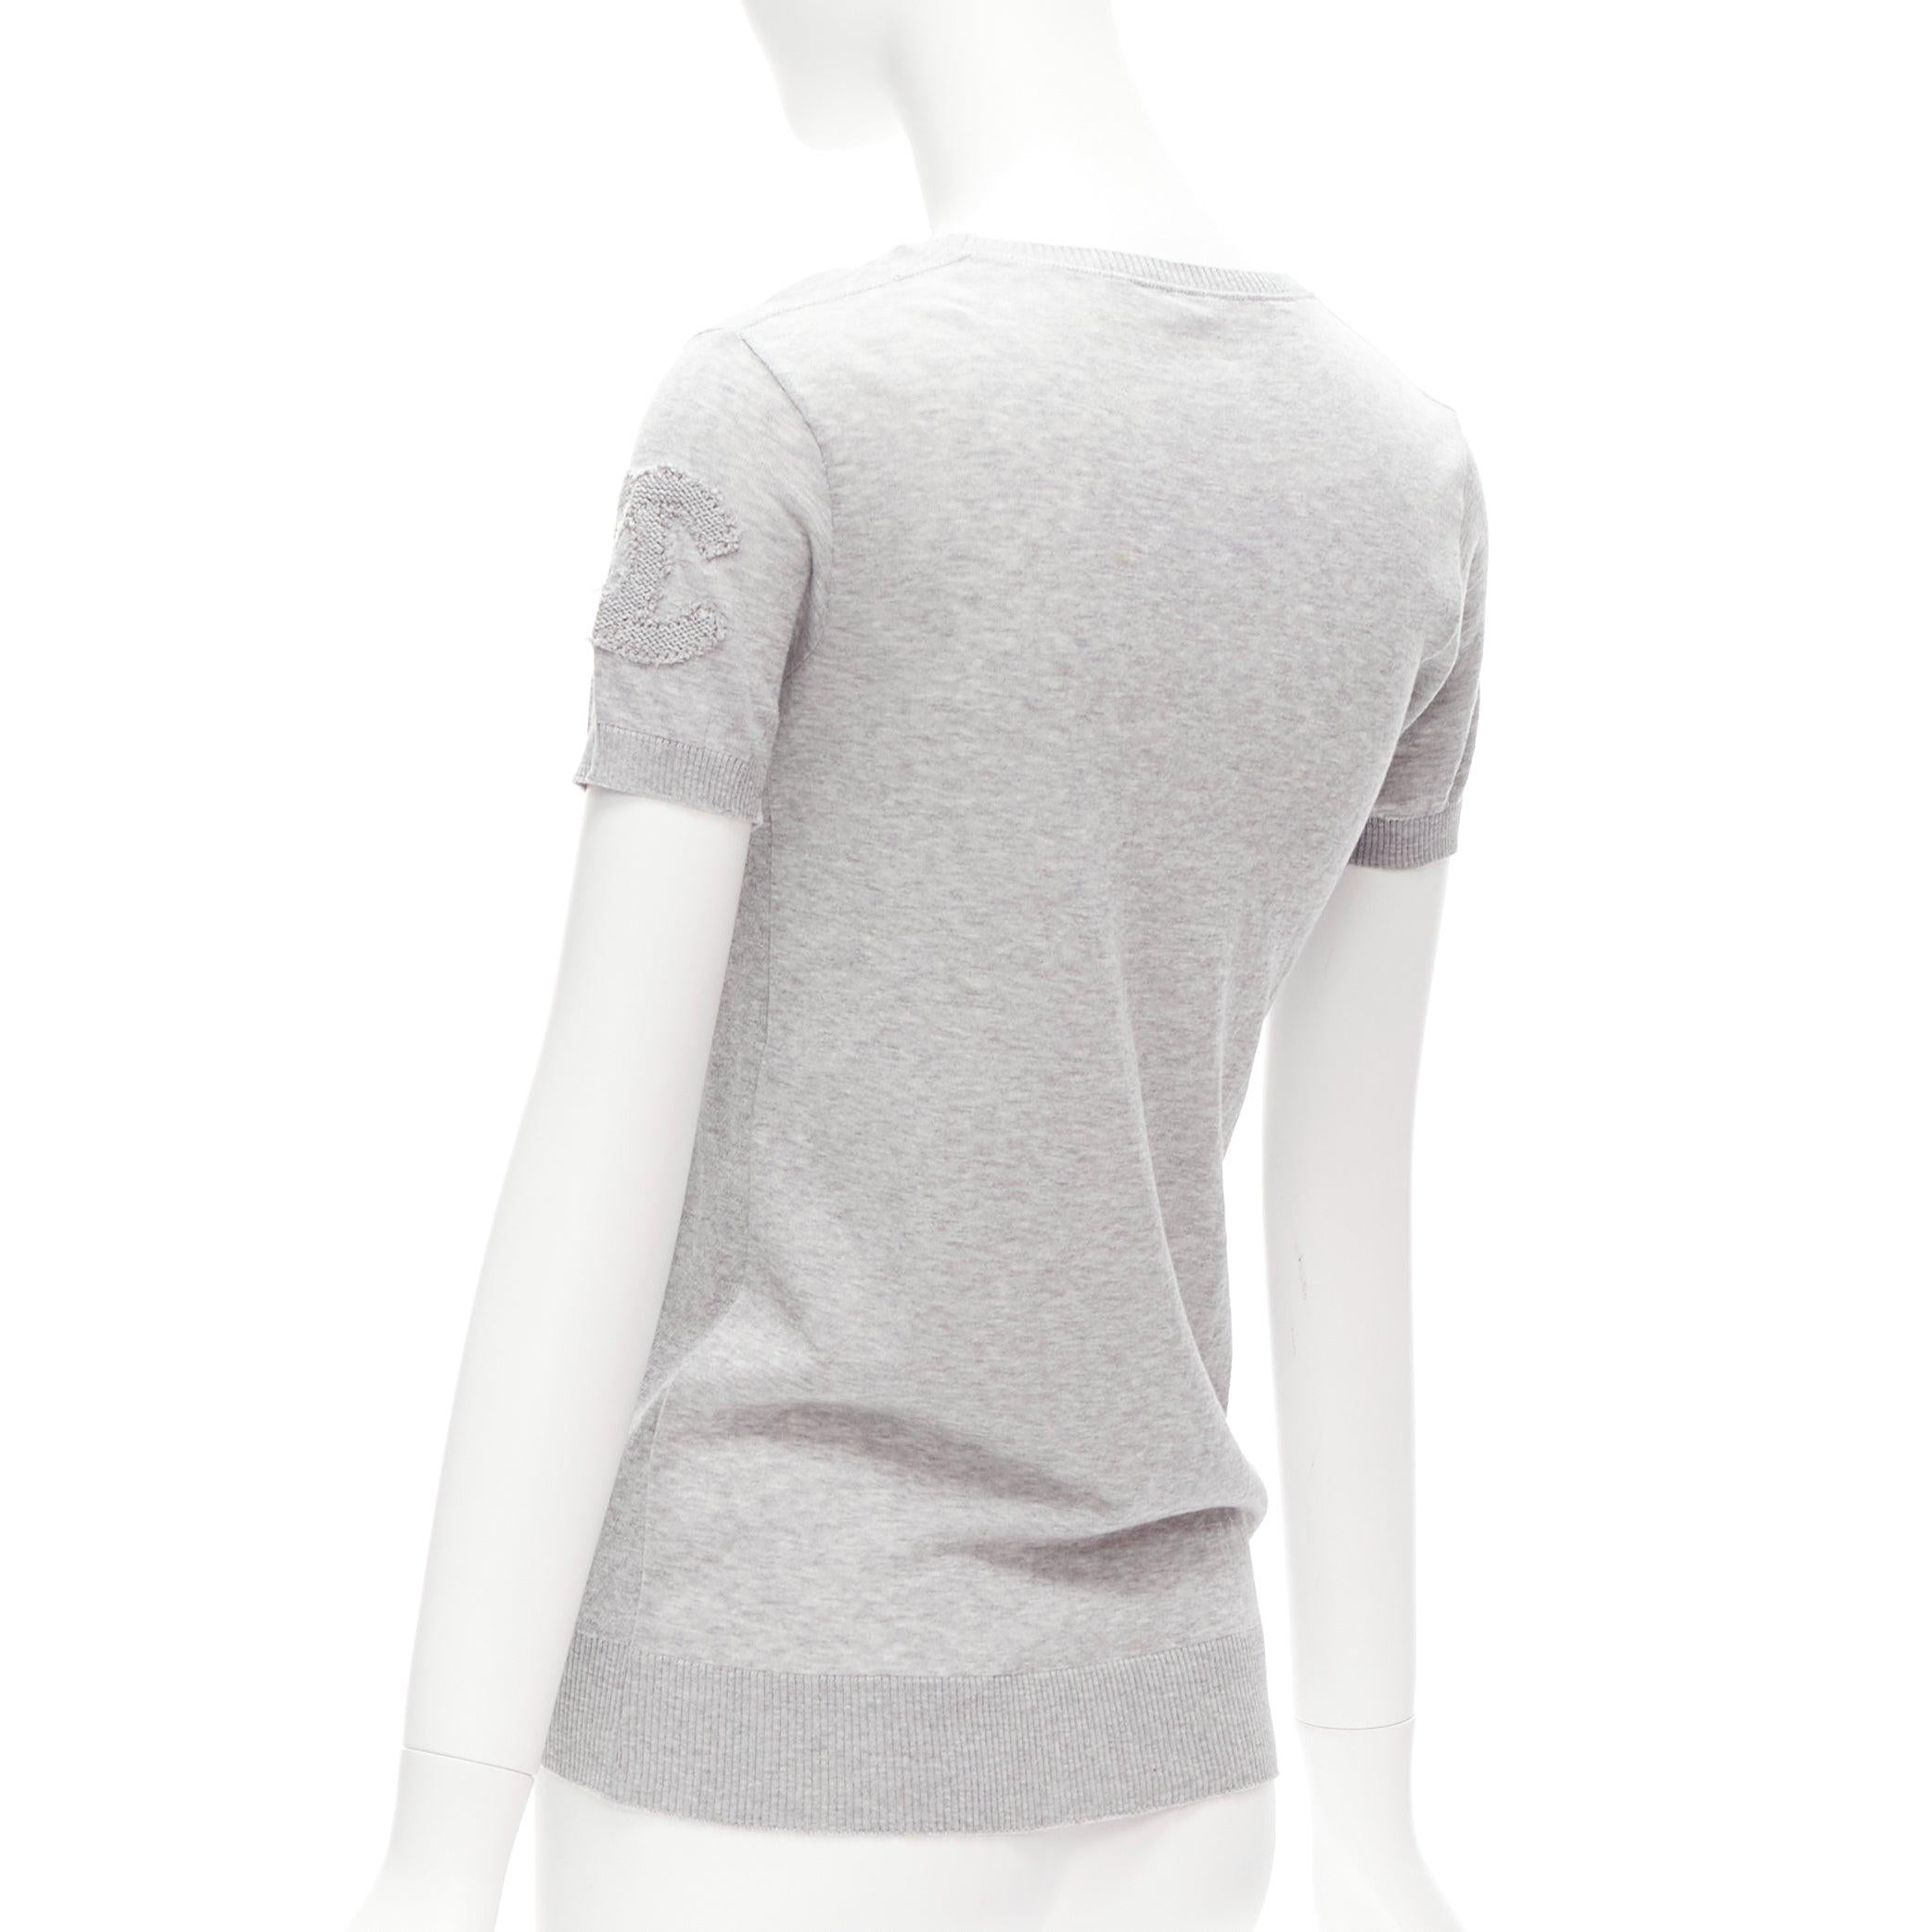 Women's CHANEL grey 100% cotton CC logo short sleeve knitted top FR36 S